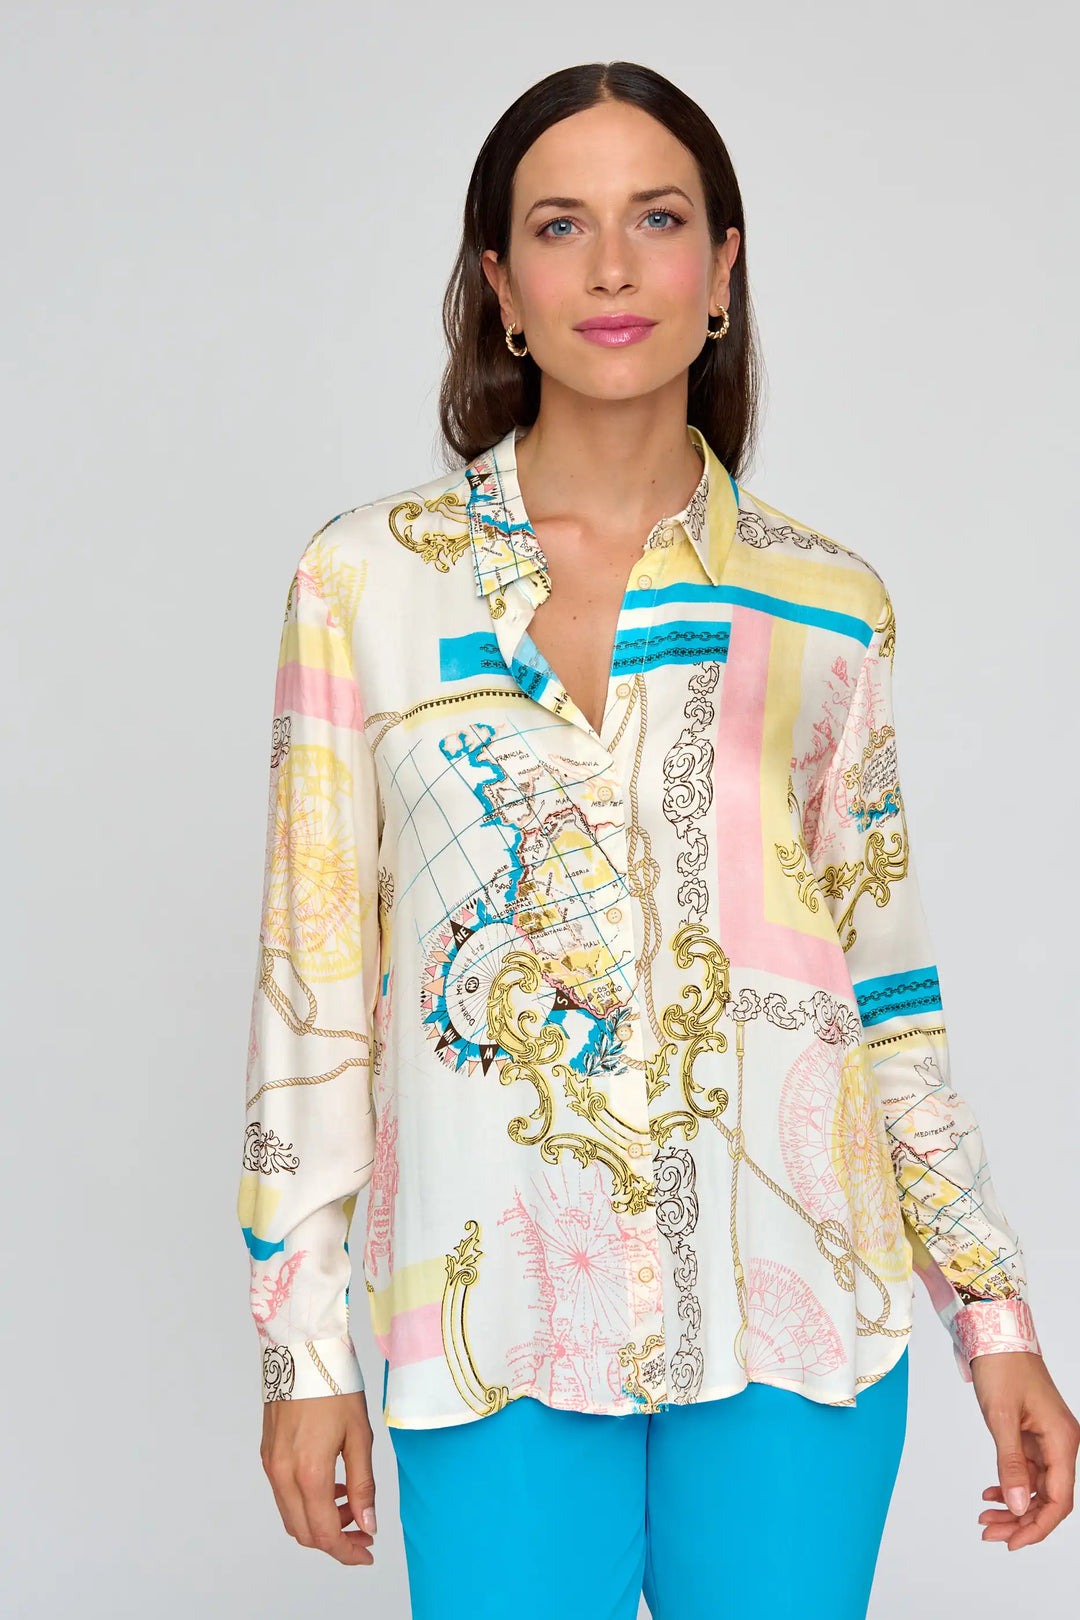 Confident model posing in the 'Berrocal' style blouse with nautical and baroque print in pastel colors, full-length sleeves, and a collar, paired with bright blue trousers.